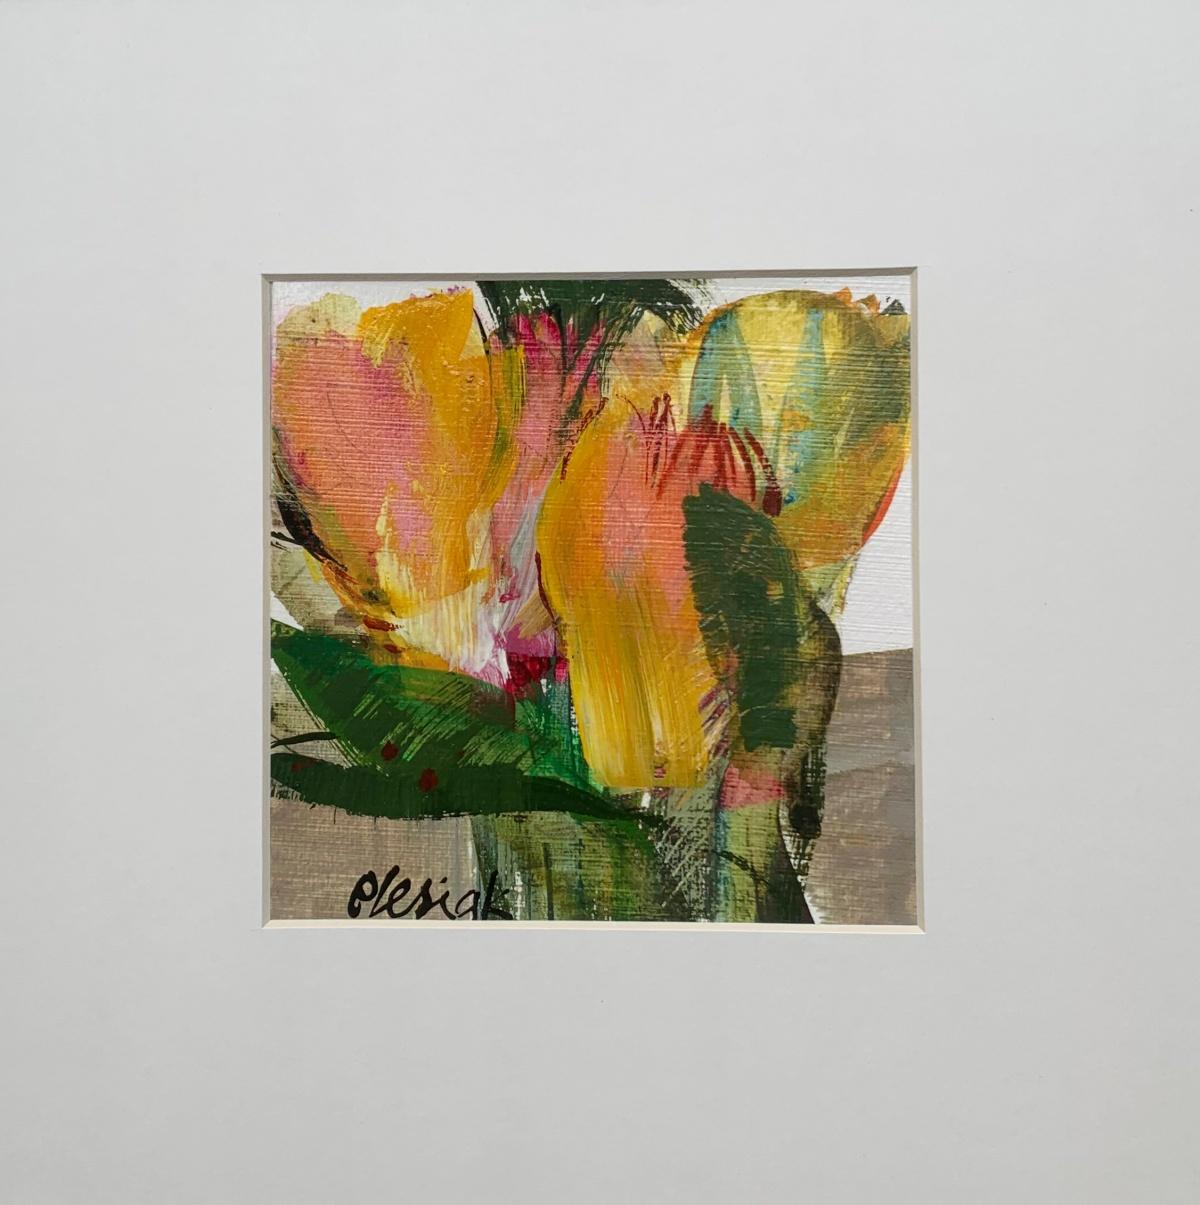 Contemporary floral still life figurative gouache on cardboard painting by Polish artist Bozena Lesiak. Painting is in a small format with glossy varnish. Bozena Lesiak's art embodies beauty of nature and its form which at times looks more abstract.